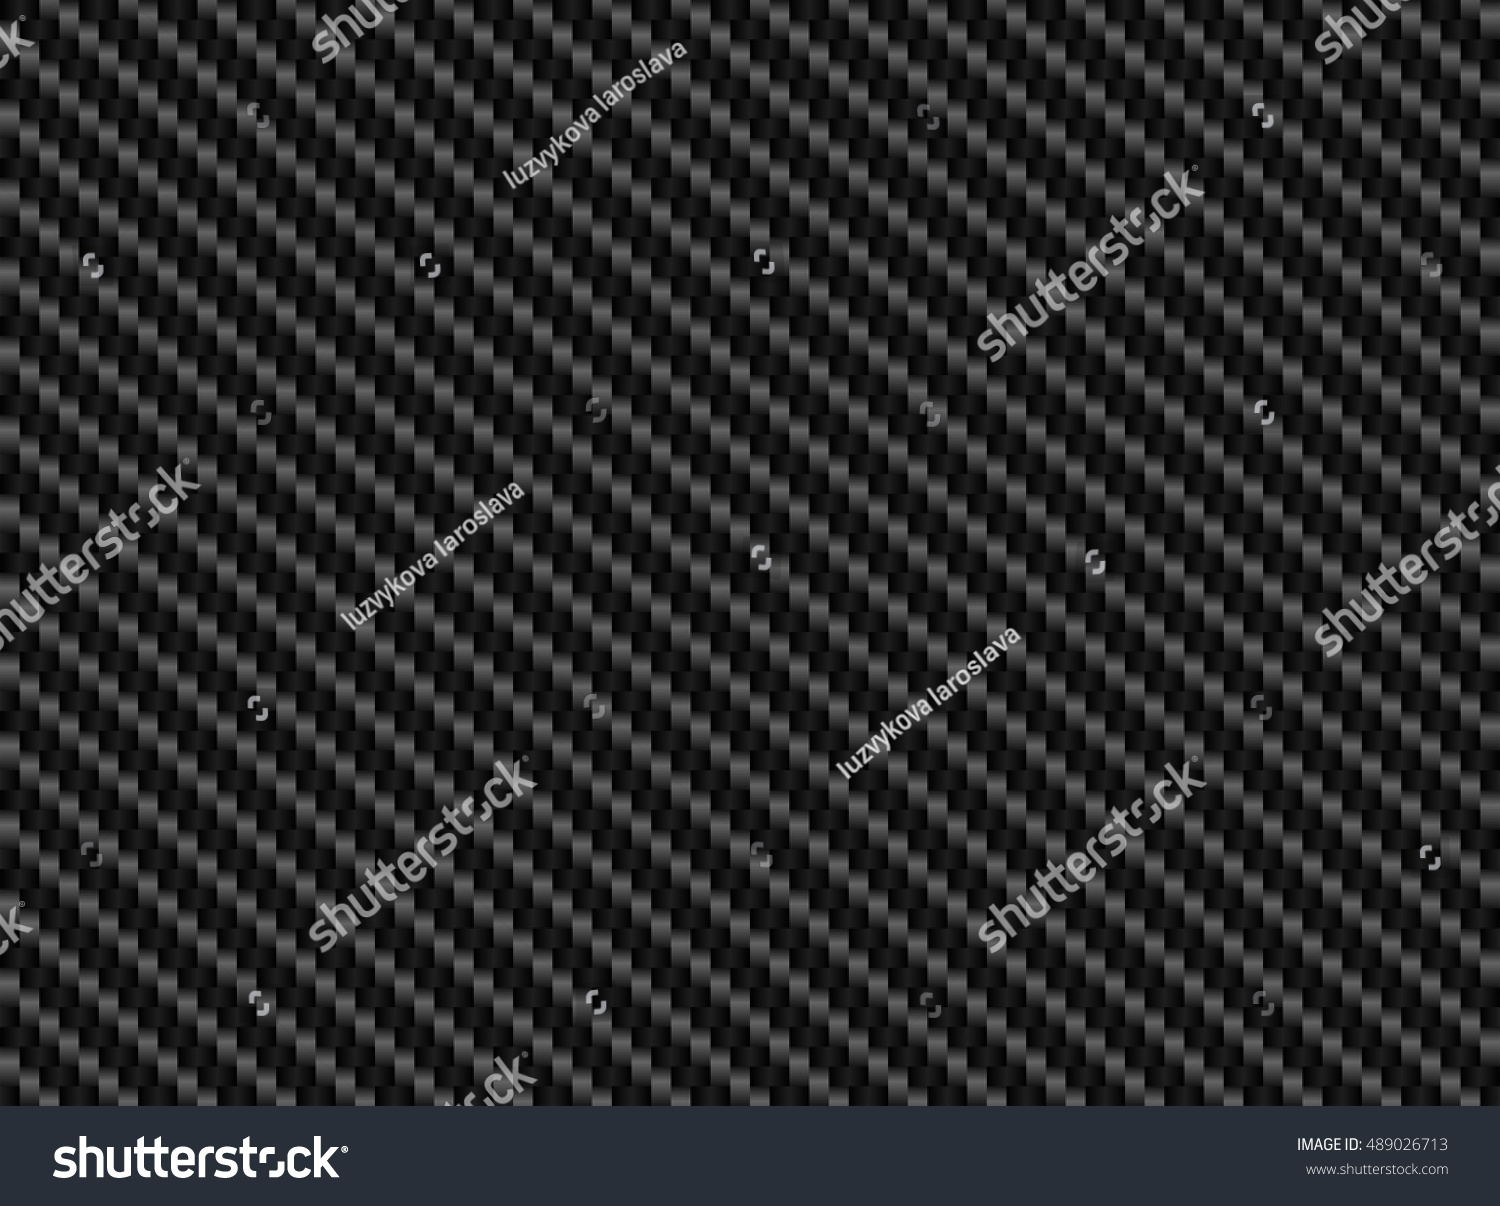 SVG of Vector black carbon fiber seamless background. Abstract cloth material wallpaper for car tuning or service. Endless web texture or page fill pattern svg